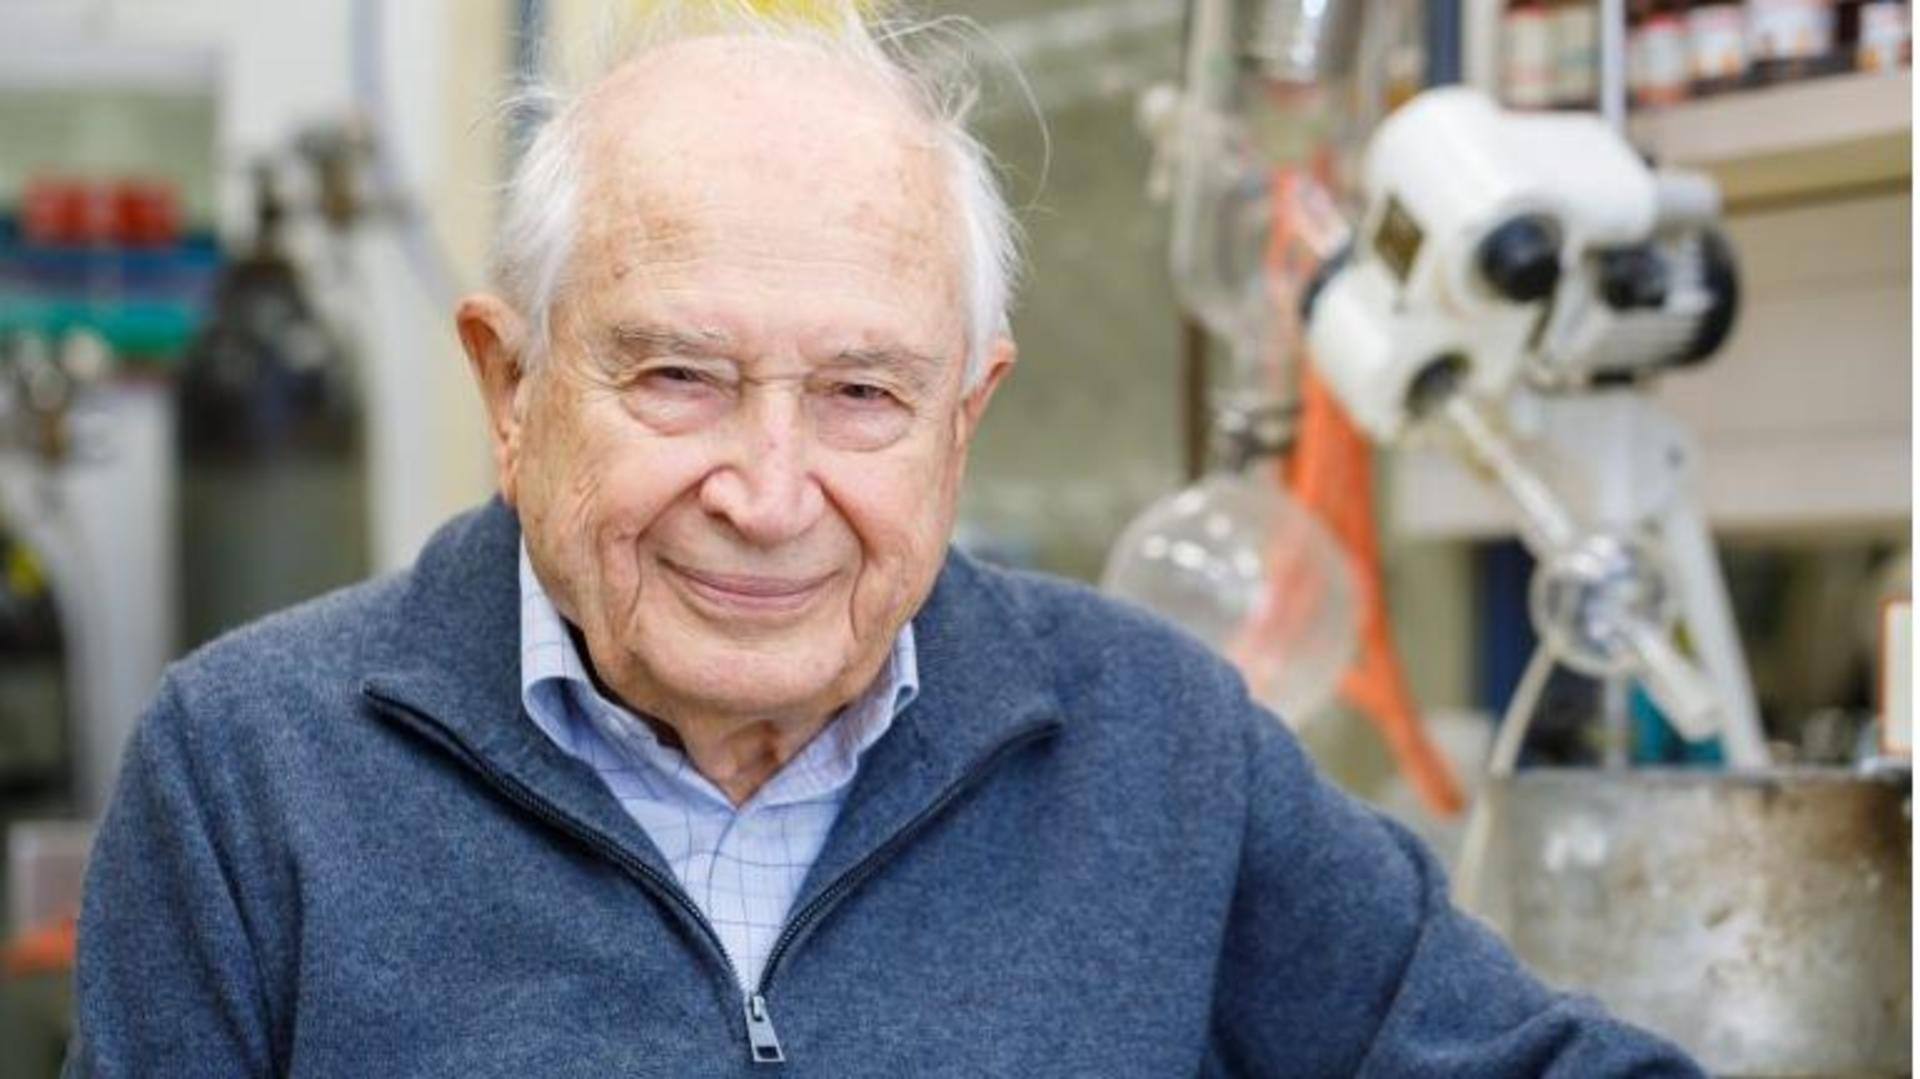 Why Raphael Mechoulam is called the 'father of cannabis research'